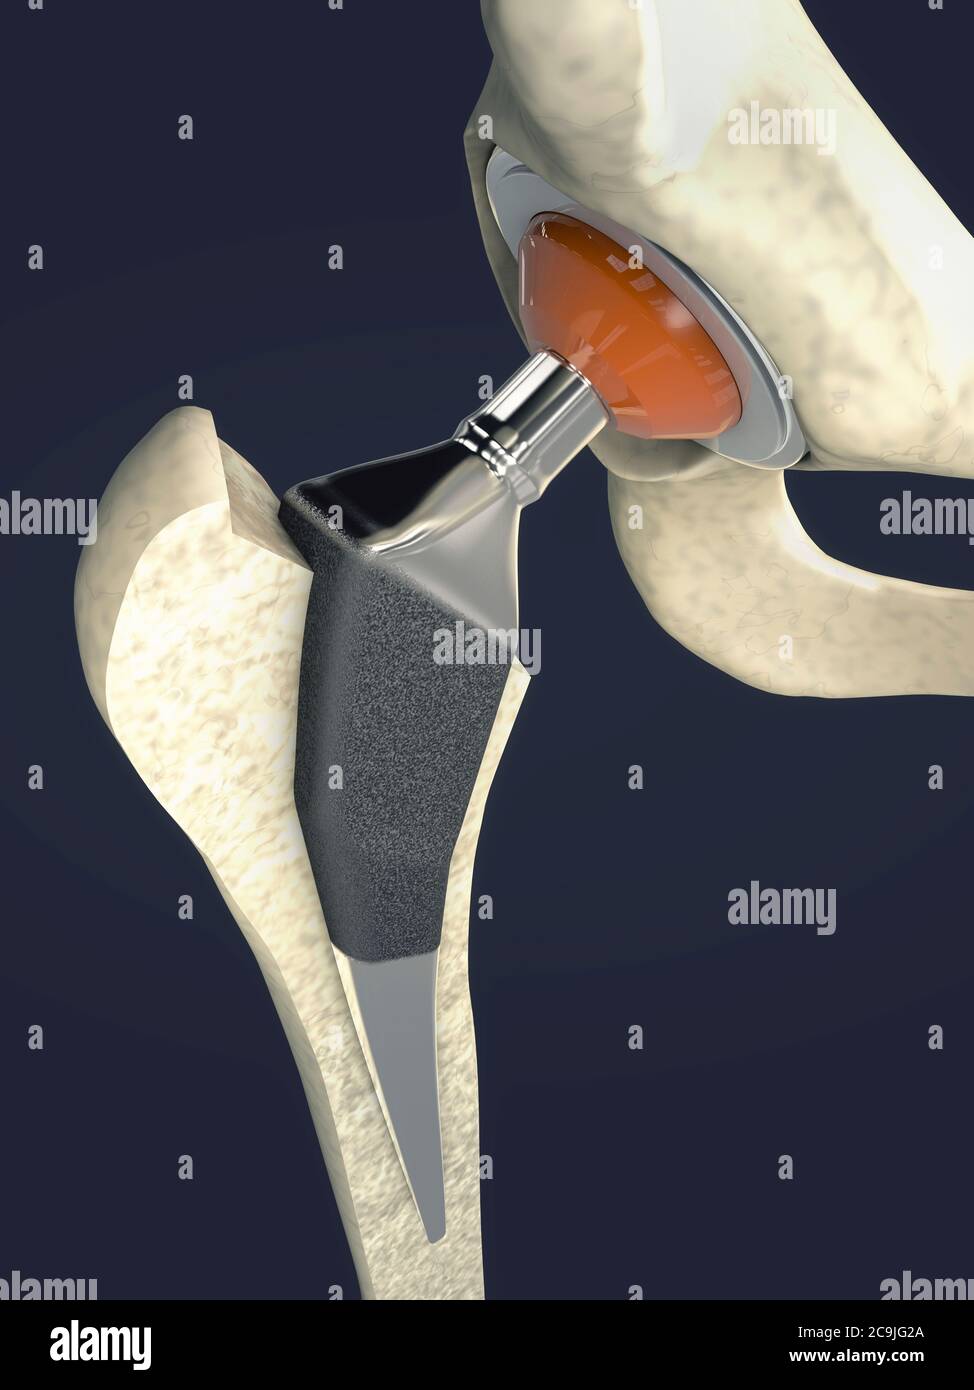 Hip replacement, illustration. Stock Photo